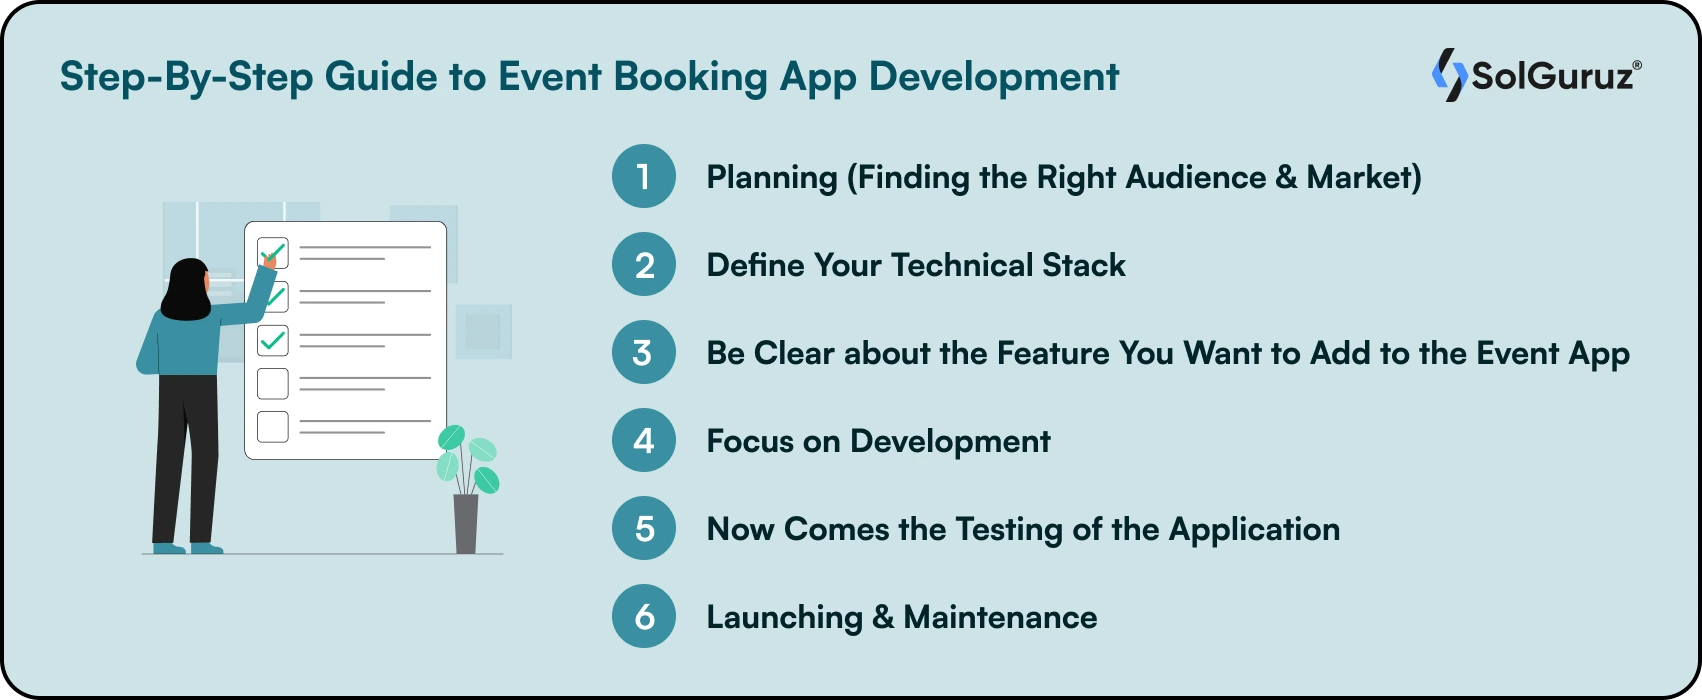 Step-By-Step Guide to Event Booking App Development